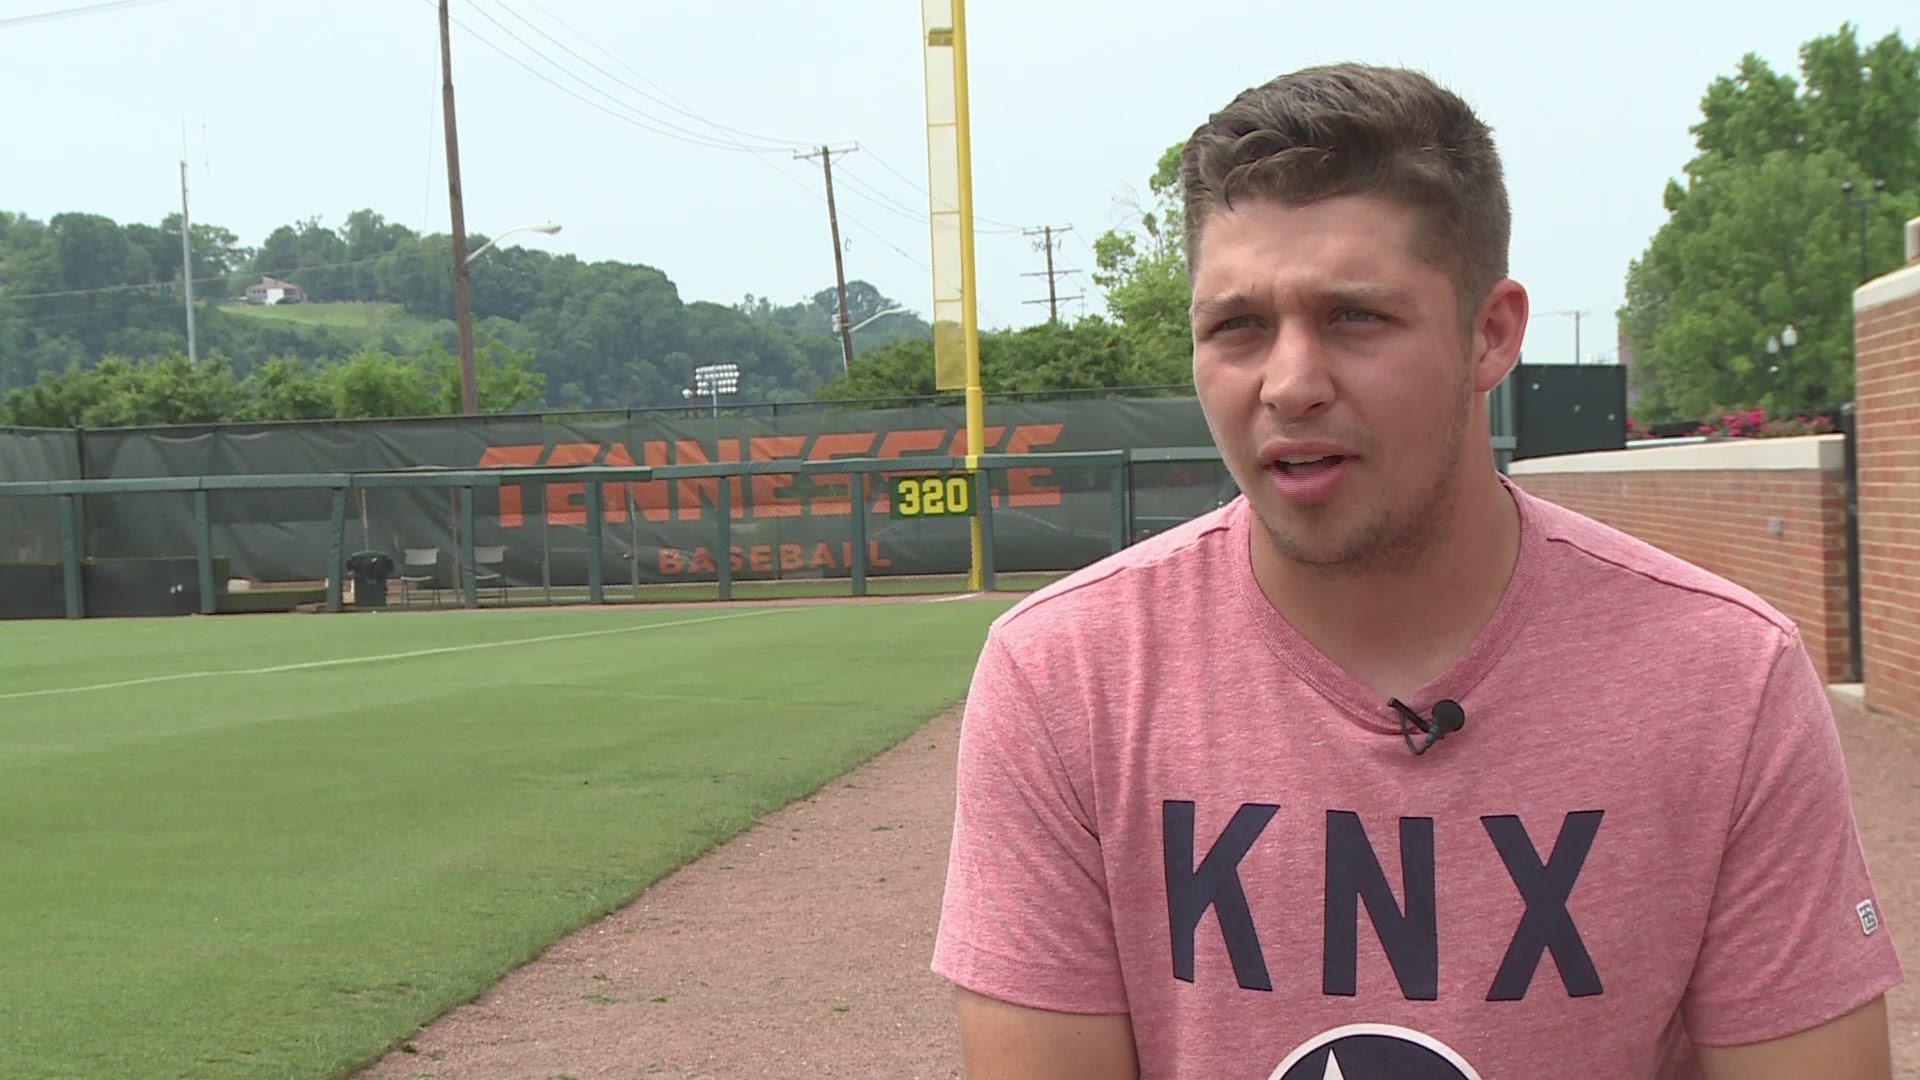 Vols catcher Nico Mascia talks about his crazy schedule, balancing his chemical and biomolecular engineering major with baseball. He talks about how little sleep he gets, how baseball gives him a break and how he maintains a good energy level.